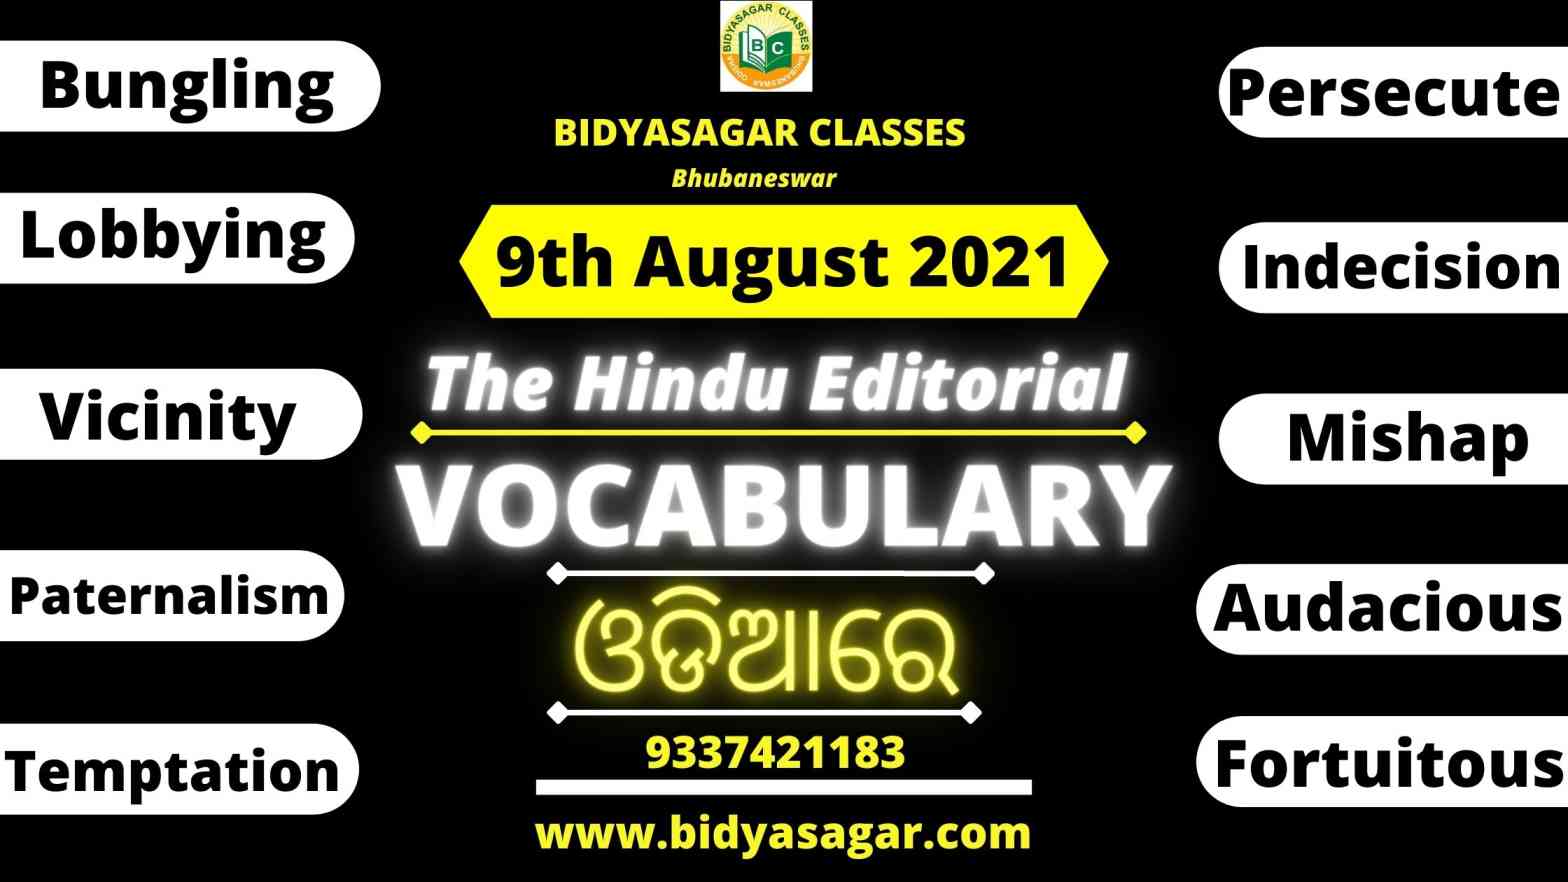 The Hindu Editorial Vocabulary of 9th August 2021